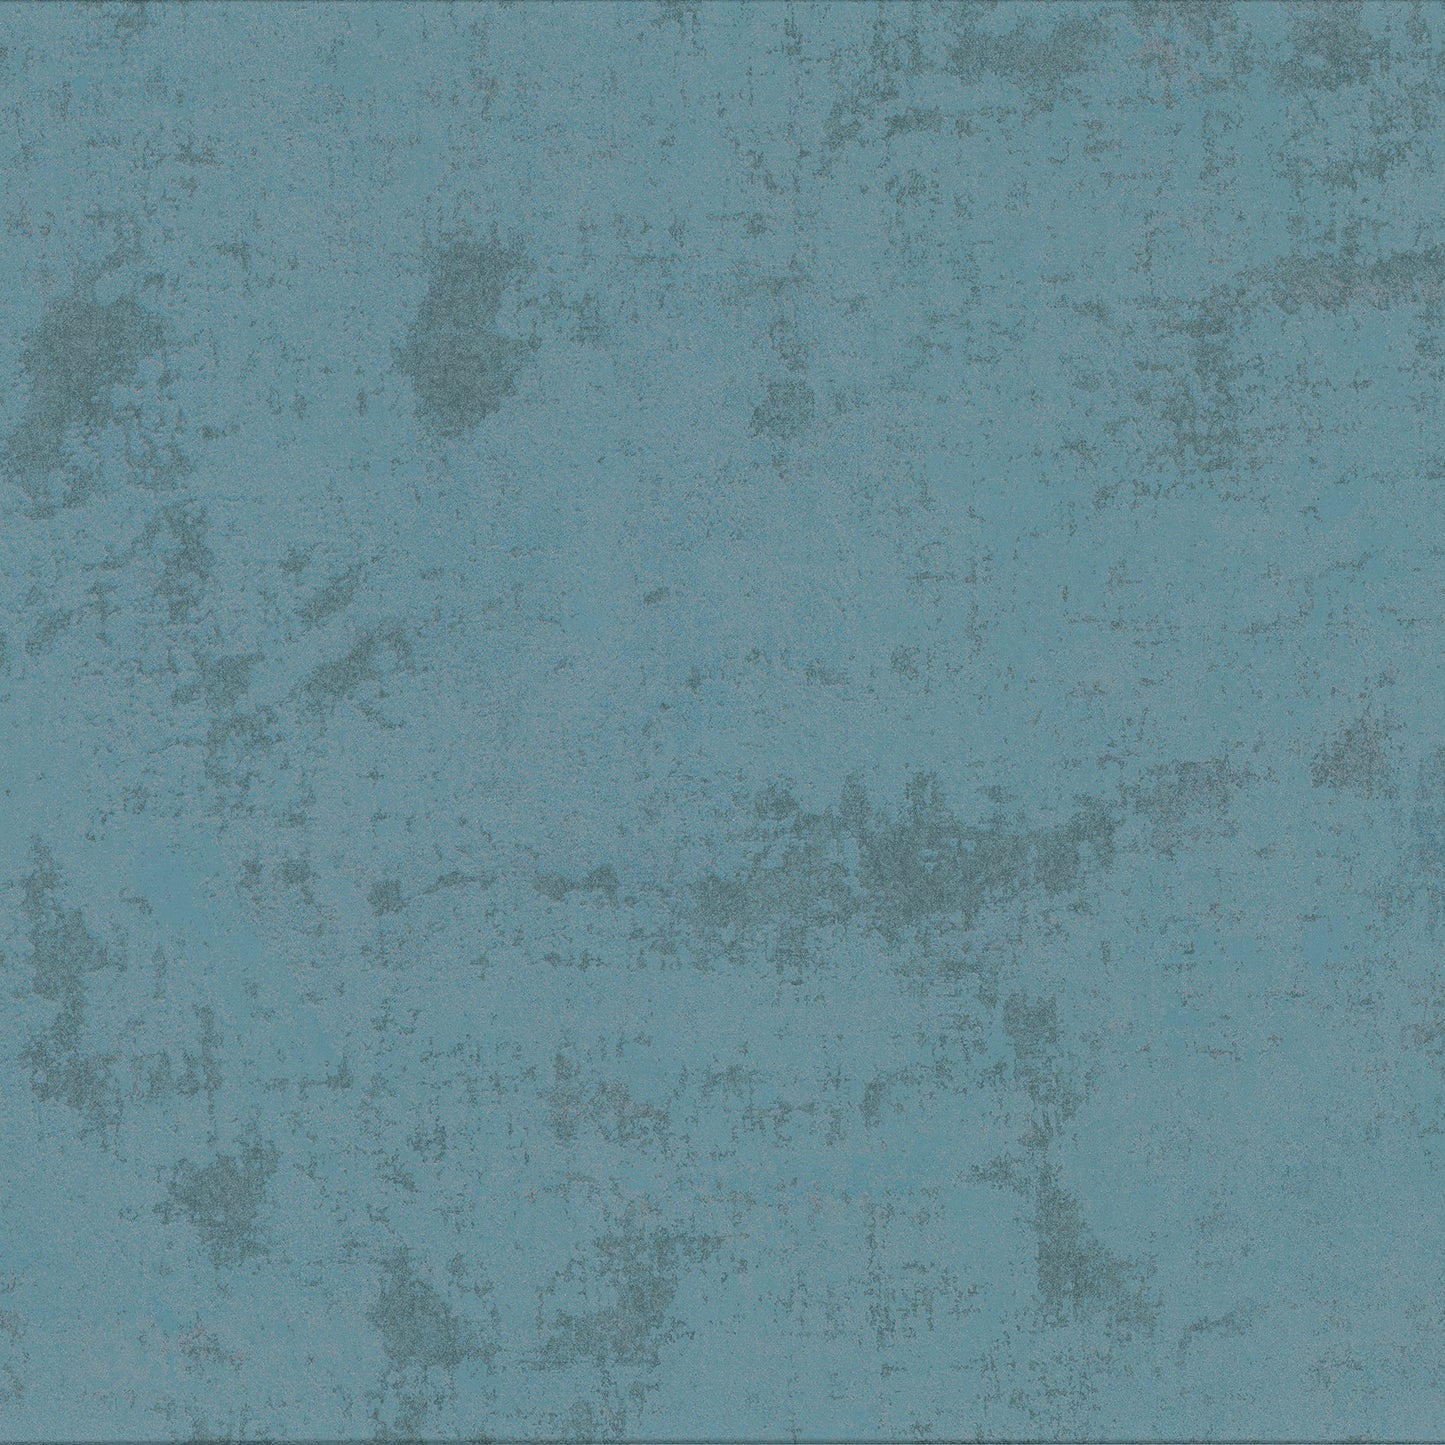 Save 2909-MLC-144 Riva Quimby Teal Faux Concrete Brewster Wallpaper